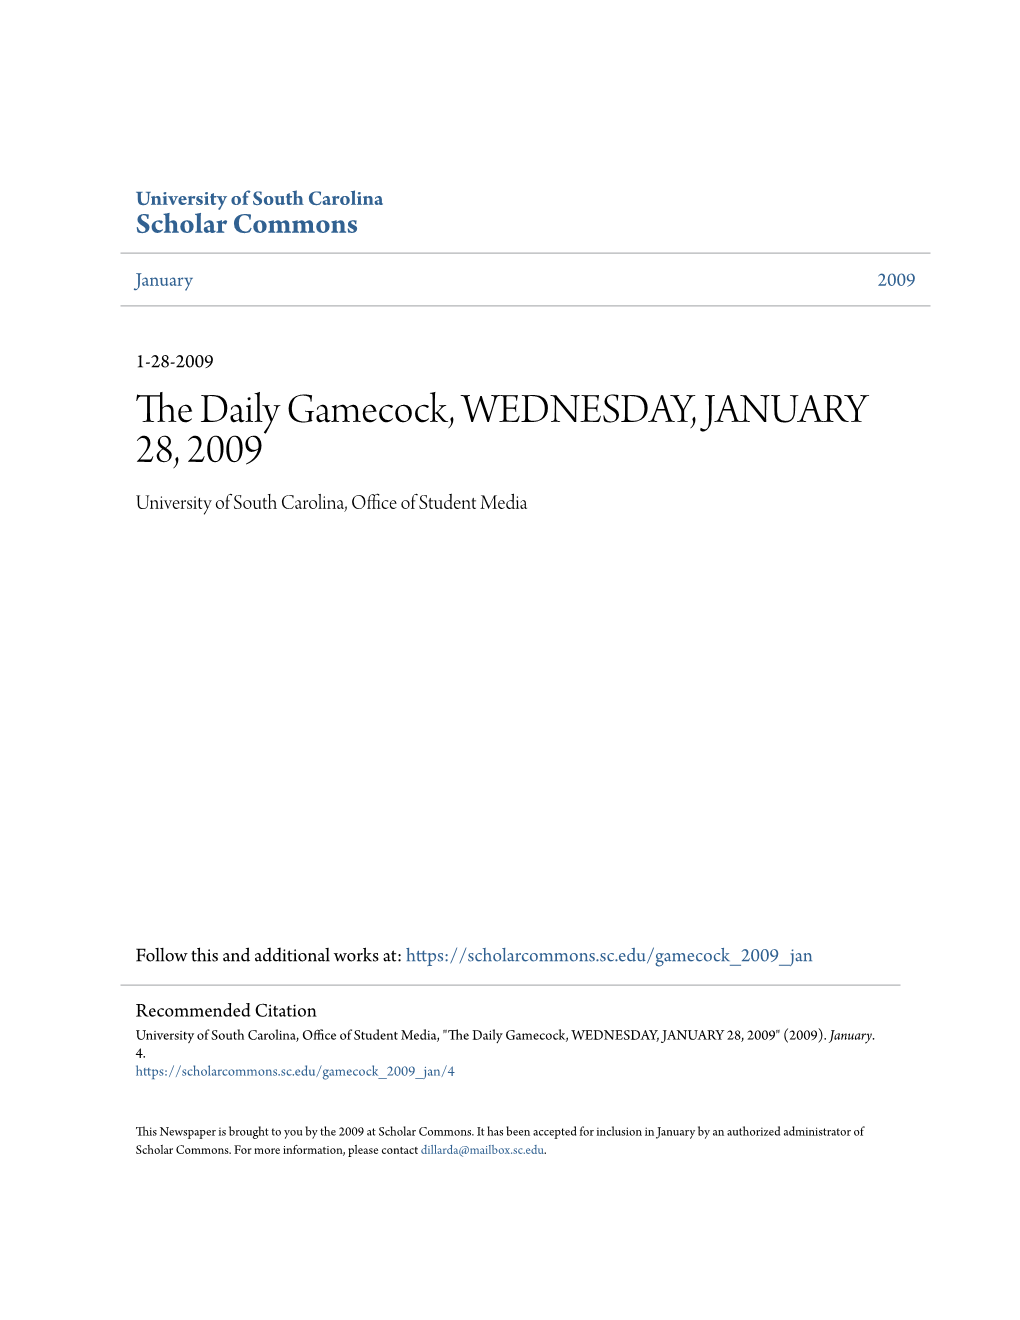 The Daily Gamecock, WEDNESDAY, JANUARY 28, 2009